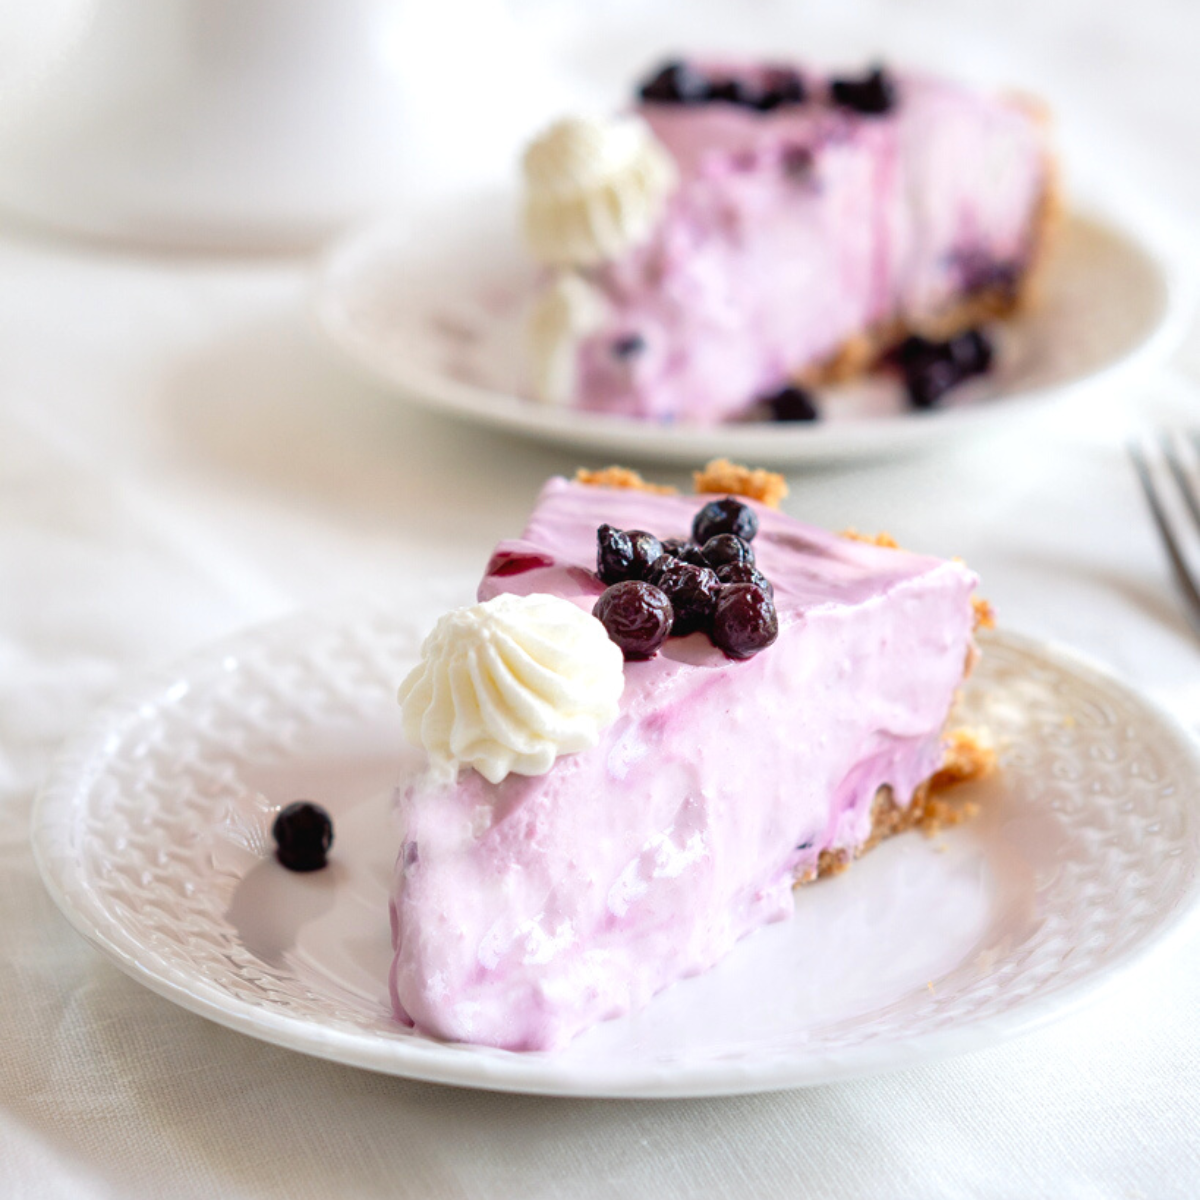 Forward table view of a slice of blue berry cream cheese lemonade pie with a piped star of whipped topping and wild blueberries on top.